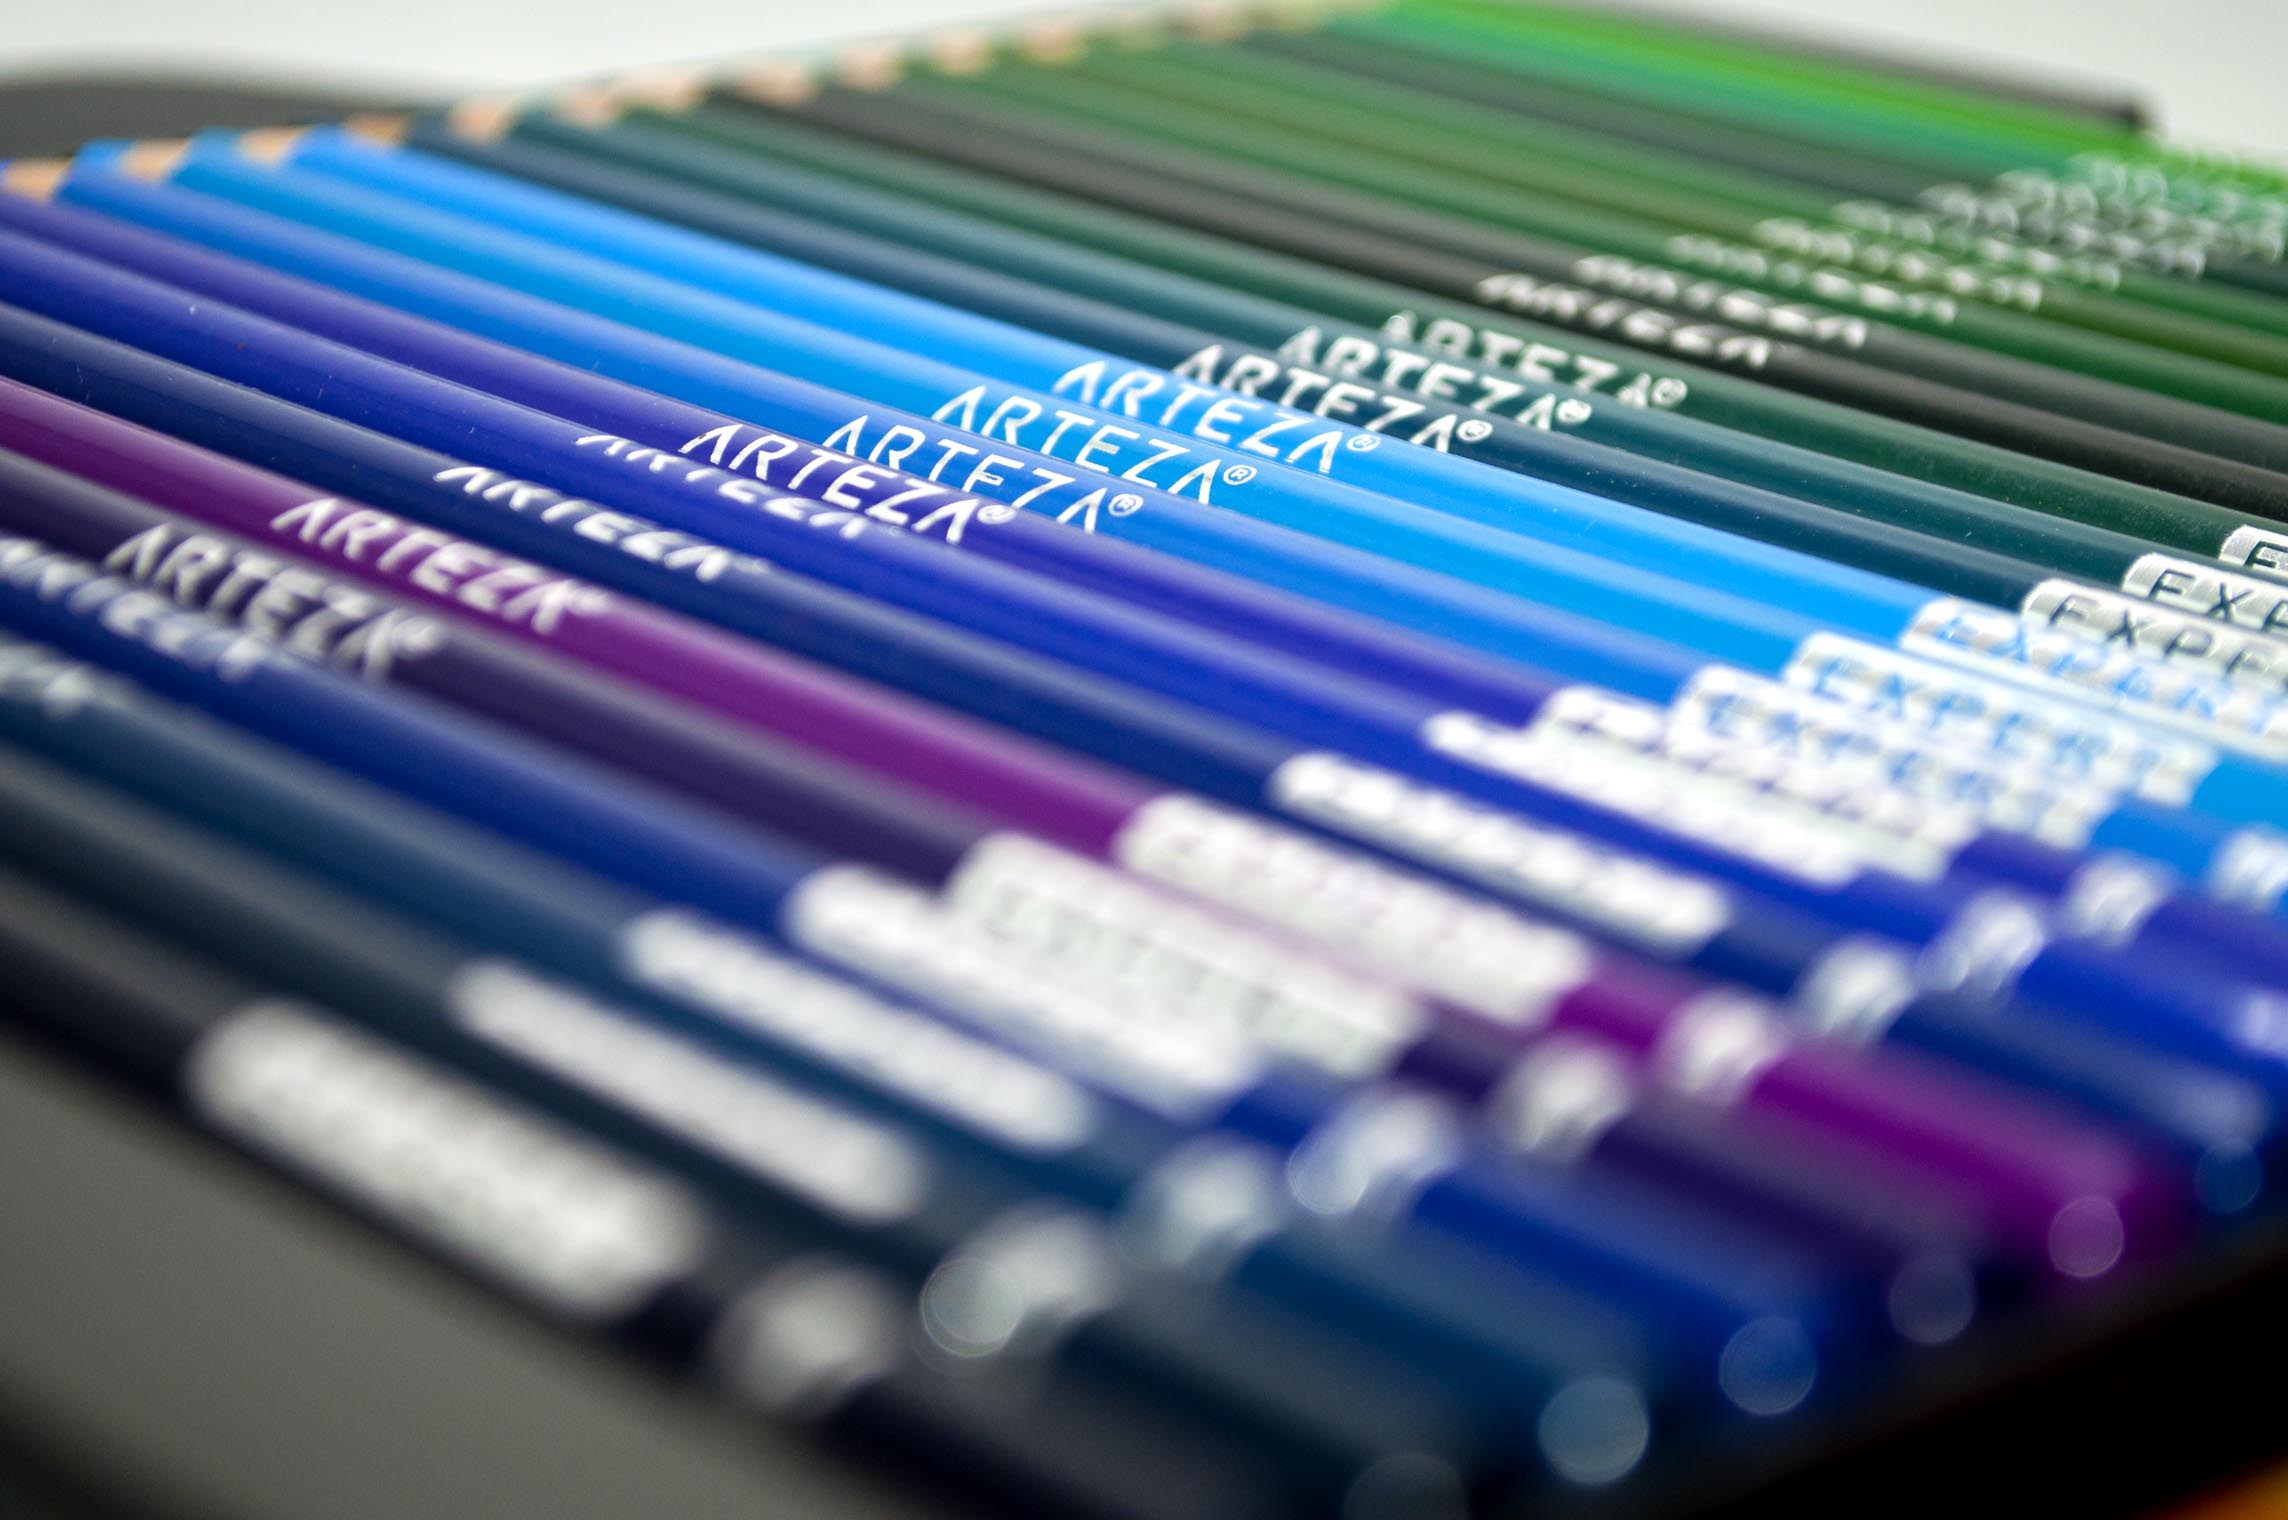 Arteza Professional Colored Pencils Review-Videos Included